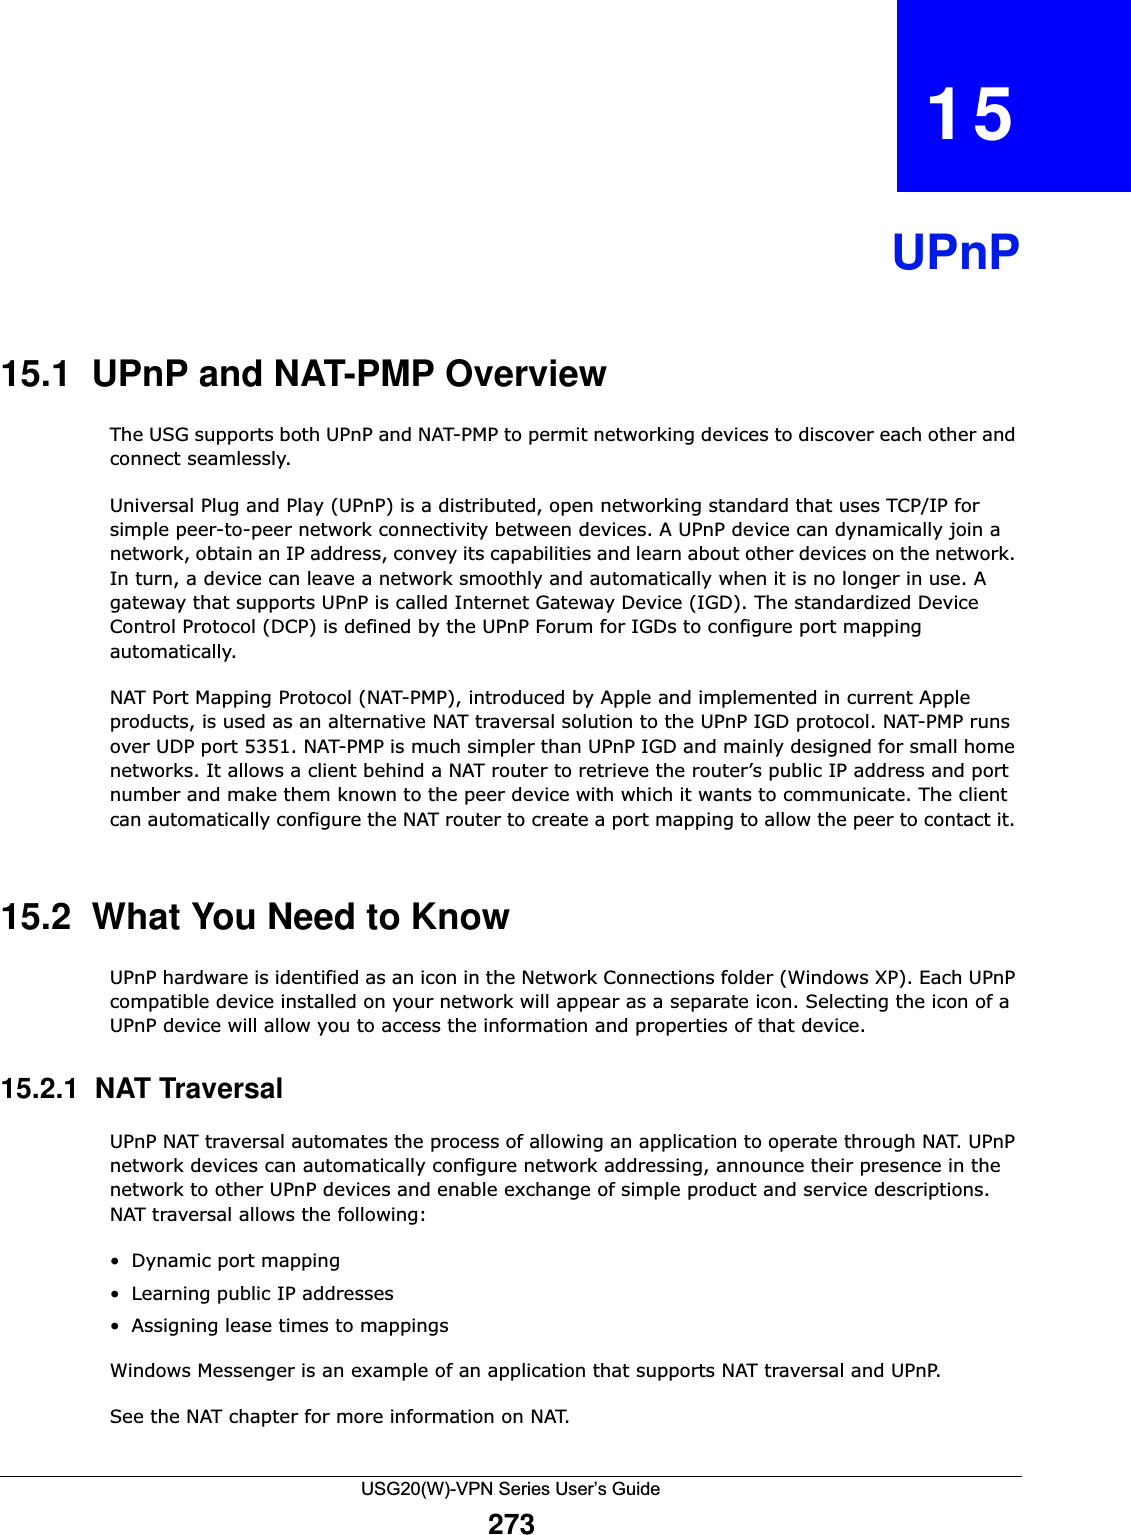 USG20(W)-VPN Series User’s Guide273CHAPTER   15UPnP15.1  UPnP and NAT-PMP Overview The USG supports both UPnP and NAT-PMP to permit networking devices to discover each other and connect seamlessly.Universal Plug and Play (UPnP) is a distributed, open networking standard that uses TCP/IP for simple peer-to-peer network connectivity between devices. A UPnP device can dynamically join a network, obtain an IP address, convey its capabilities and learn about other devices on the network. In turn, a device can leave a network smoothly and automatically when it is no longer in use. A gateway that supports UPnP is called Internet Gateway Device (IGD). The standardized Device Control Protocol (DCP) is defined by the UPnP Forum for IGDs to configure port mapping automatically.NAT Port Mapping Protocol (NAT-PMP), introduced by Apple and implemented in current Apple products, is used as an alternative NAT traversal solution to the UPnP IGD protocol. NAT-PMP runs over UDP port 5351. NAT-PMP is much simpler than UPnP IGD and mainly designed for small home networks. It allows a client behind a NAT router to retrieve the router’s public IP address and port number and make them known to the peer device with which it wants to communicate. The client can automatically configure the NAT router to create a port mapping to allow the peer to contact it. 15.2  What You Need to KnowUPnP hardware is identified as an icon in the Network Connections folder (Windows XP). Each UPnP compatible device installed on your network will appear as a separate icon. Selecting the icon of a UPnP device will allow you to access the information and properties of that device. 15.2.1  NAT TraversalUPnP NAT traversal automates the process of allowing an application to operate through NAT. UPnP network devices can automatically configure network addressing, announce their presence in the network to other UPnP devices and enable exchange of simple product and service descriptions. NAT traversal allows the following:• Dynamic port mapping• Learning public IP addresses• Assigning lease times to mappingsWindows Messenger is an example of an application that supports NAT traversal and UPnP. See the NAT chapter for more information on NAT.